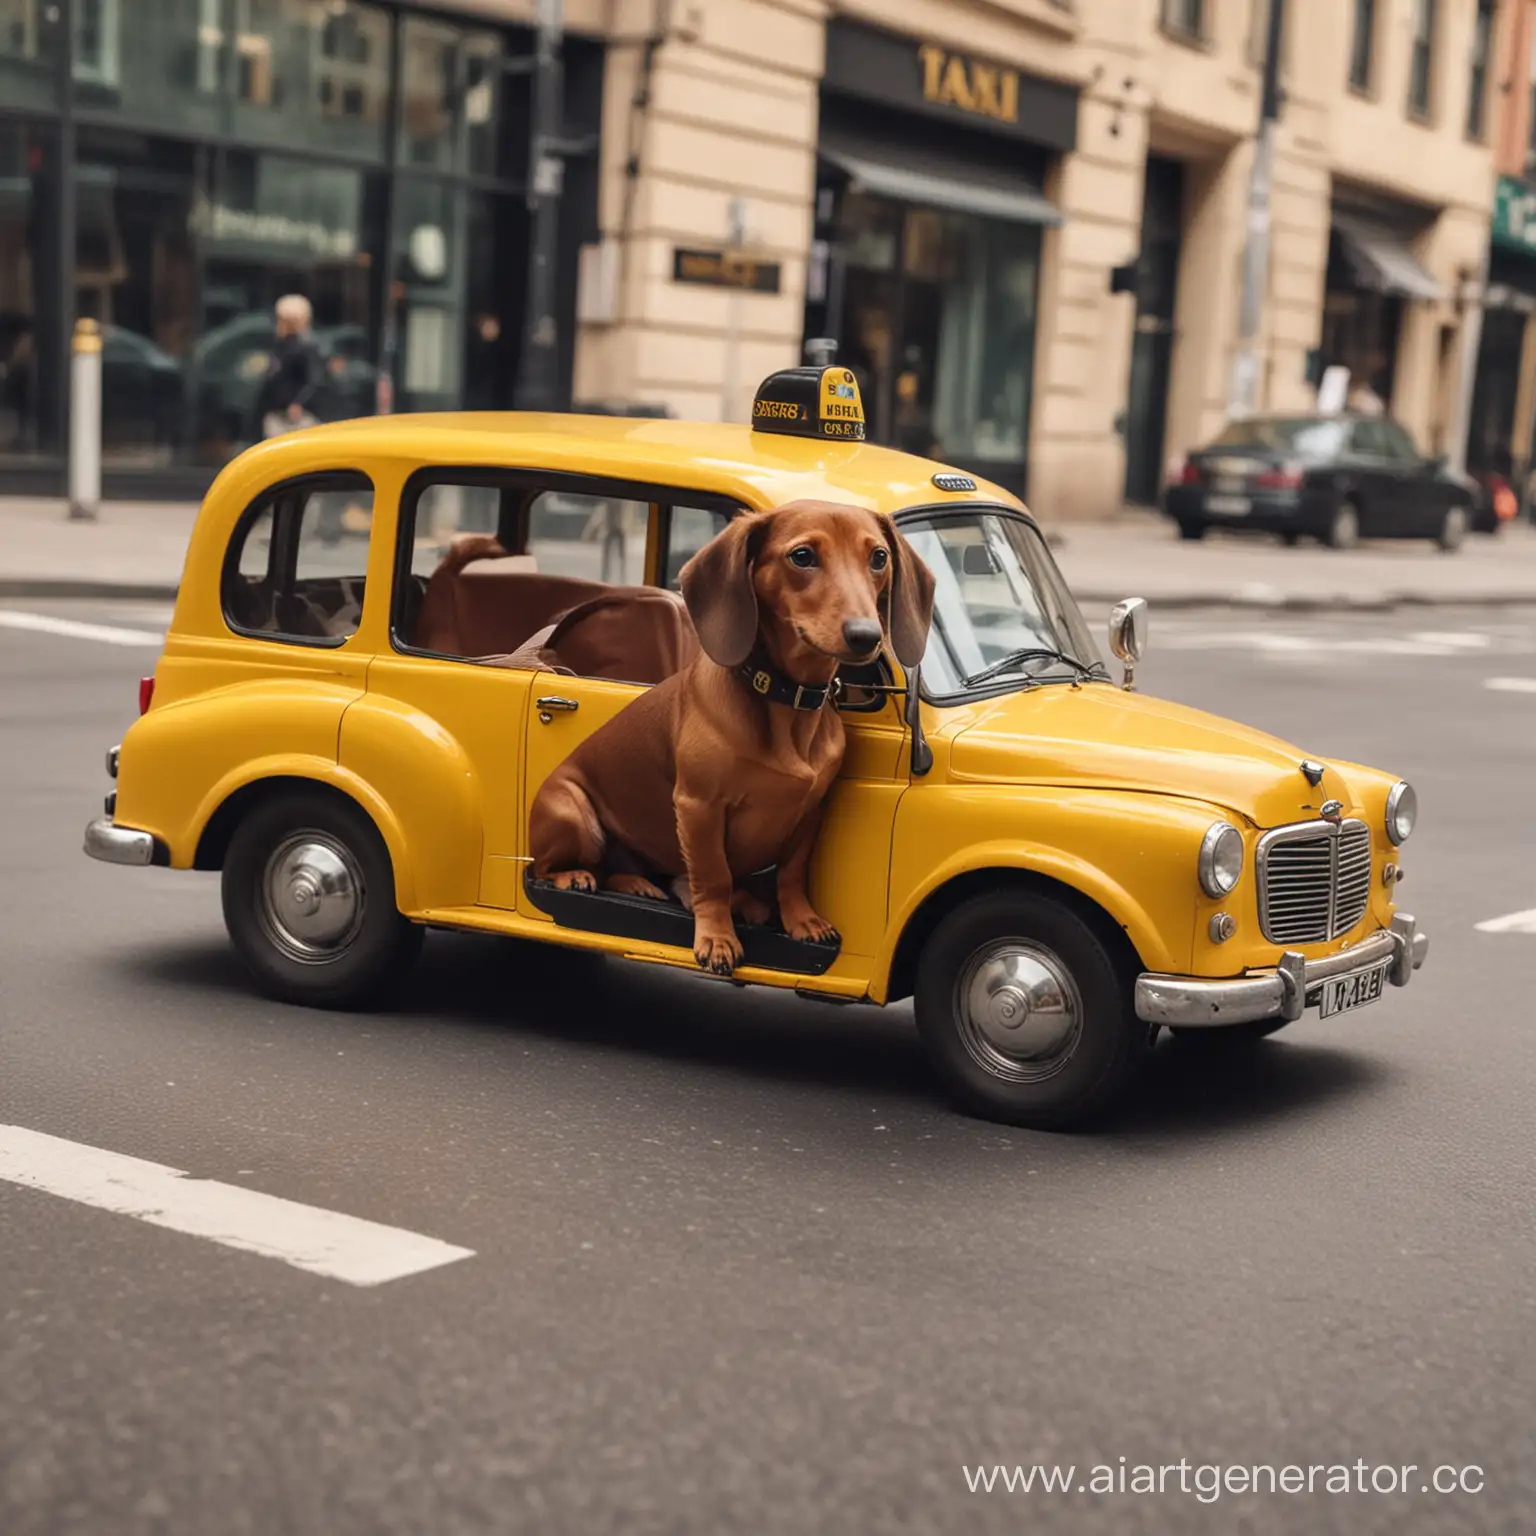 Dachshund-Riding-in-Taxi-Adorable-Canine-Traveling-in-Urban-Setting